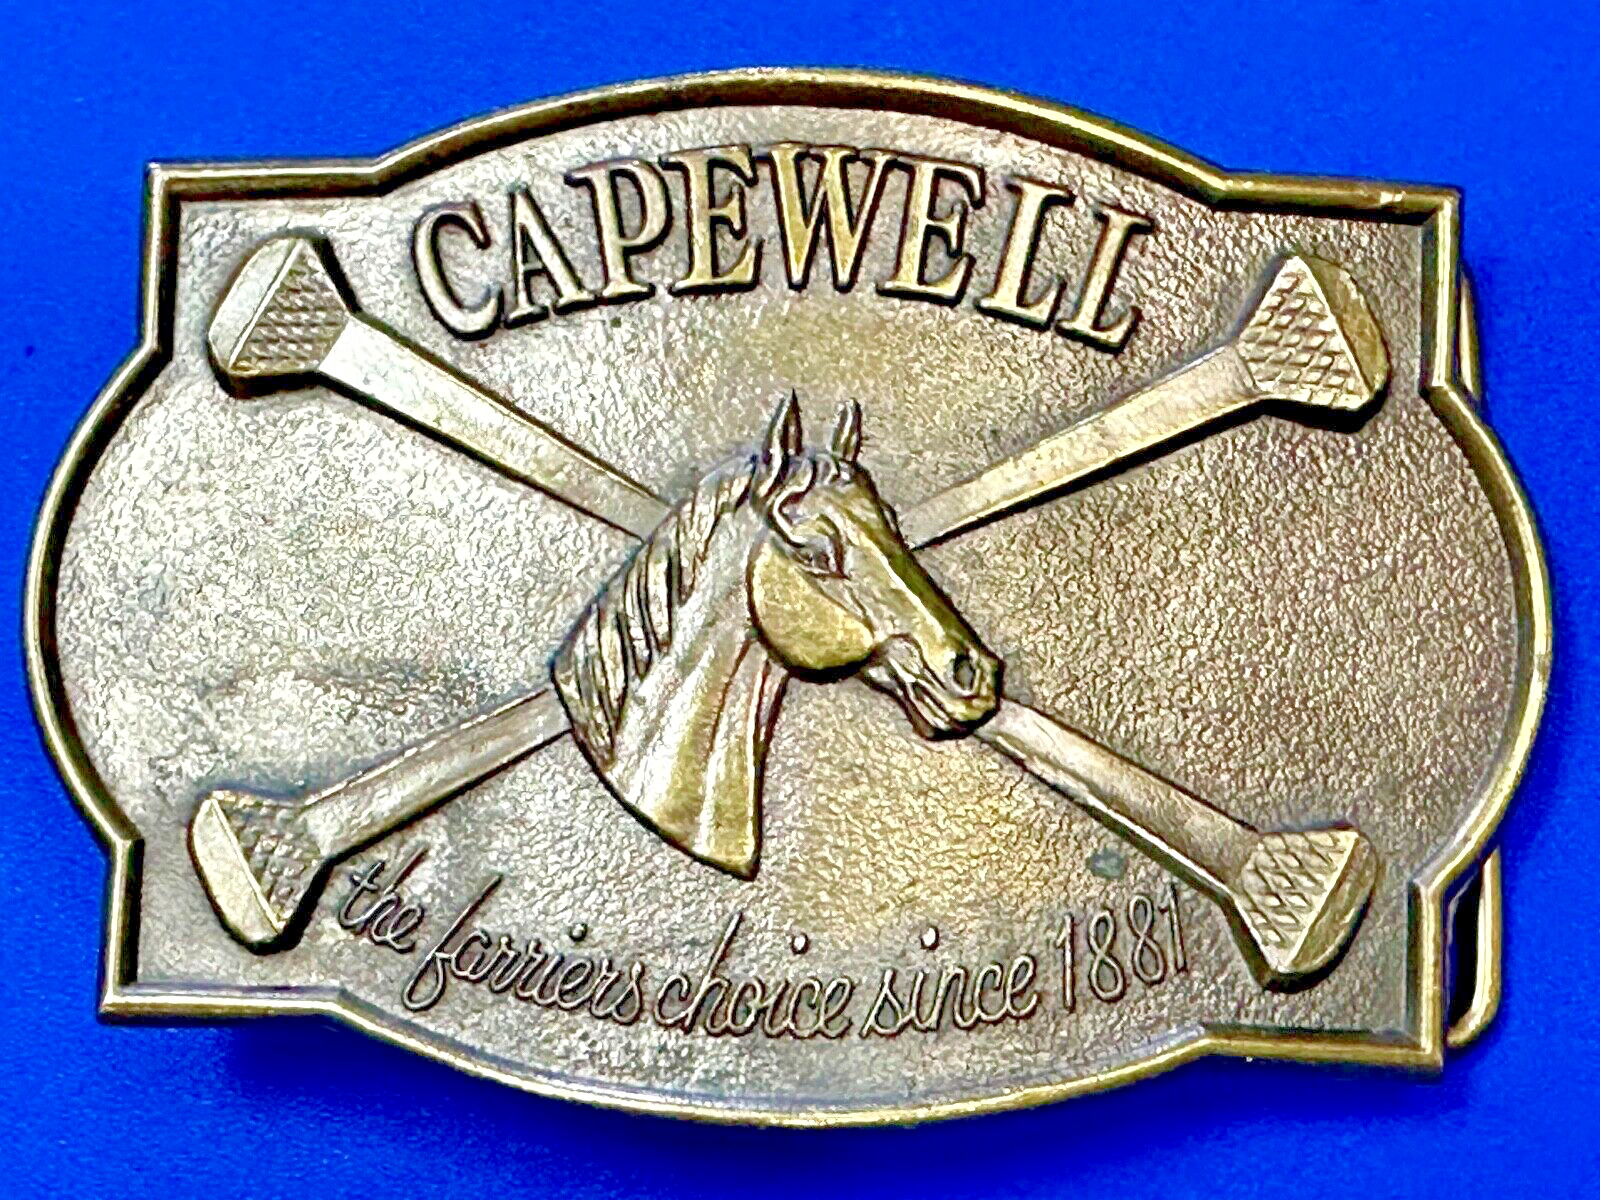 Capewell Horse Shoe Nail Co The Farmers Choice since 1881 Vintage Belt Buckle